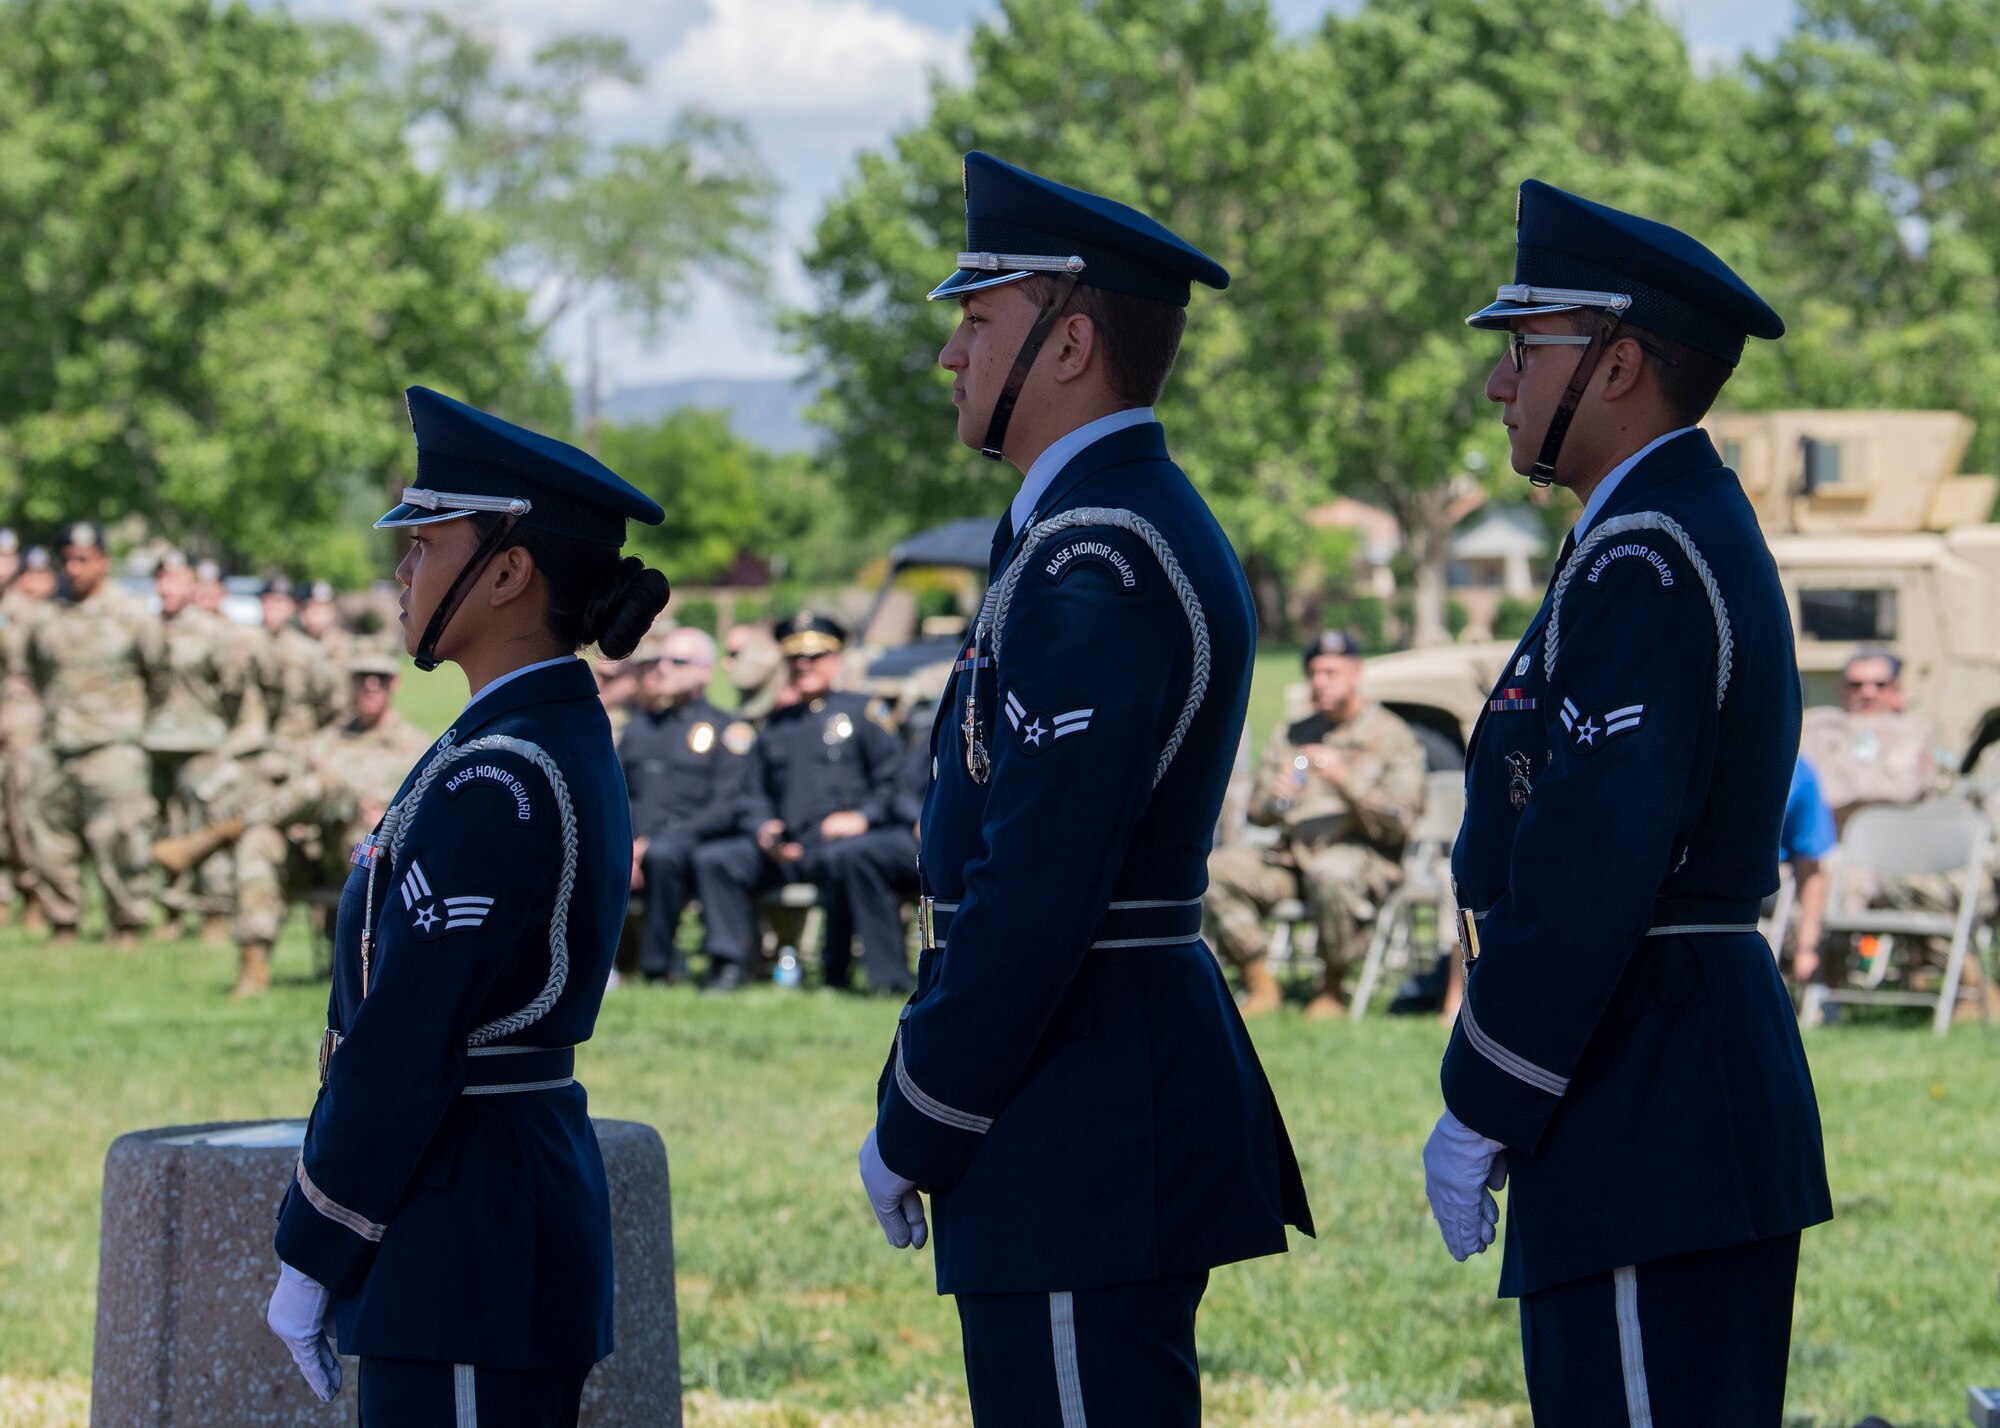 Kirtland Air Force Base Honor Guardsmen stand before lowering the flag during the Police Week Memorial Retreat Ceremony at Kirtland Air Force Base, N.M., May 15. National Police Week is an annual nationwide tribute to law enforcement officers who have lost their lives in the line of duty for the safety and protection of others. National Police Week started Sunday, May 12, and ends Saturday, May 18. (U.S. Air Force photo by Staff Sgt. J.D. Strong II)